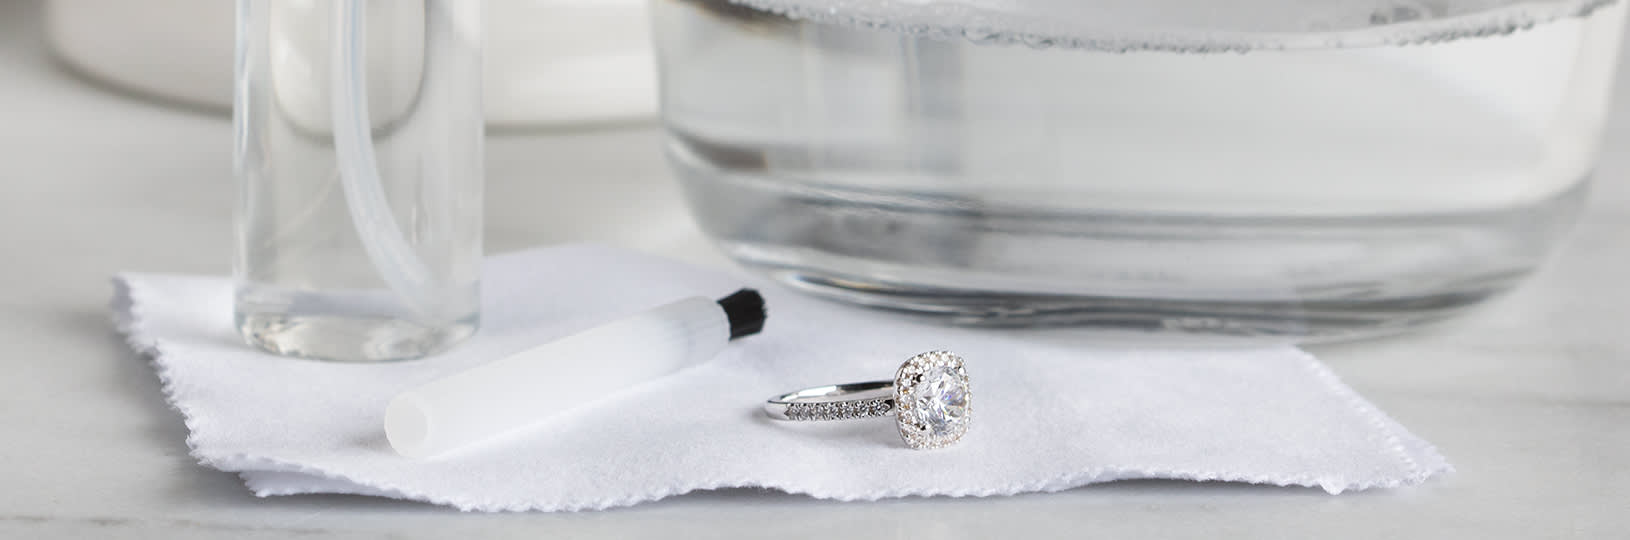 Kit for cleaning your engagement ring